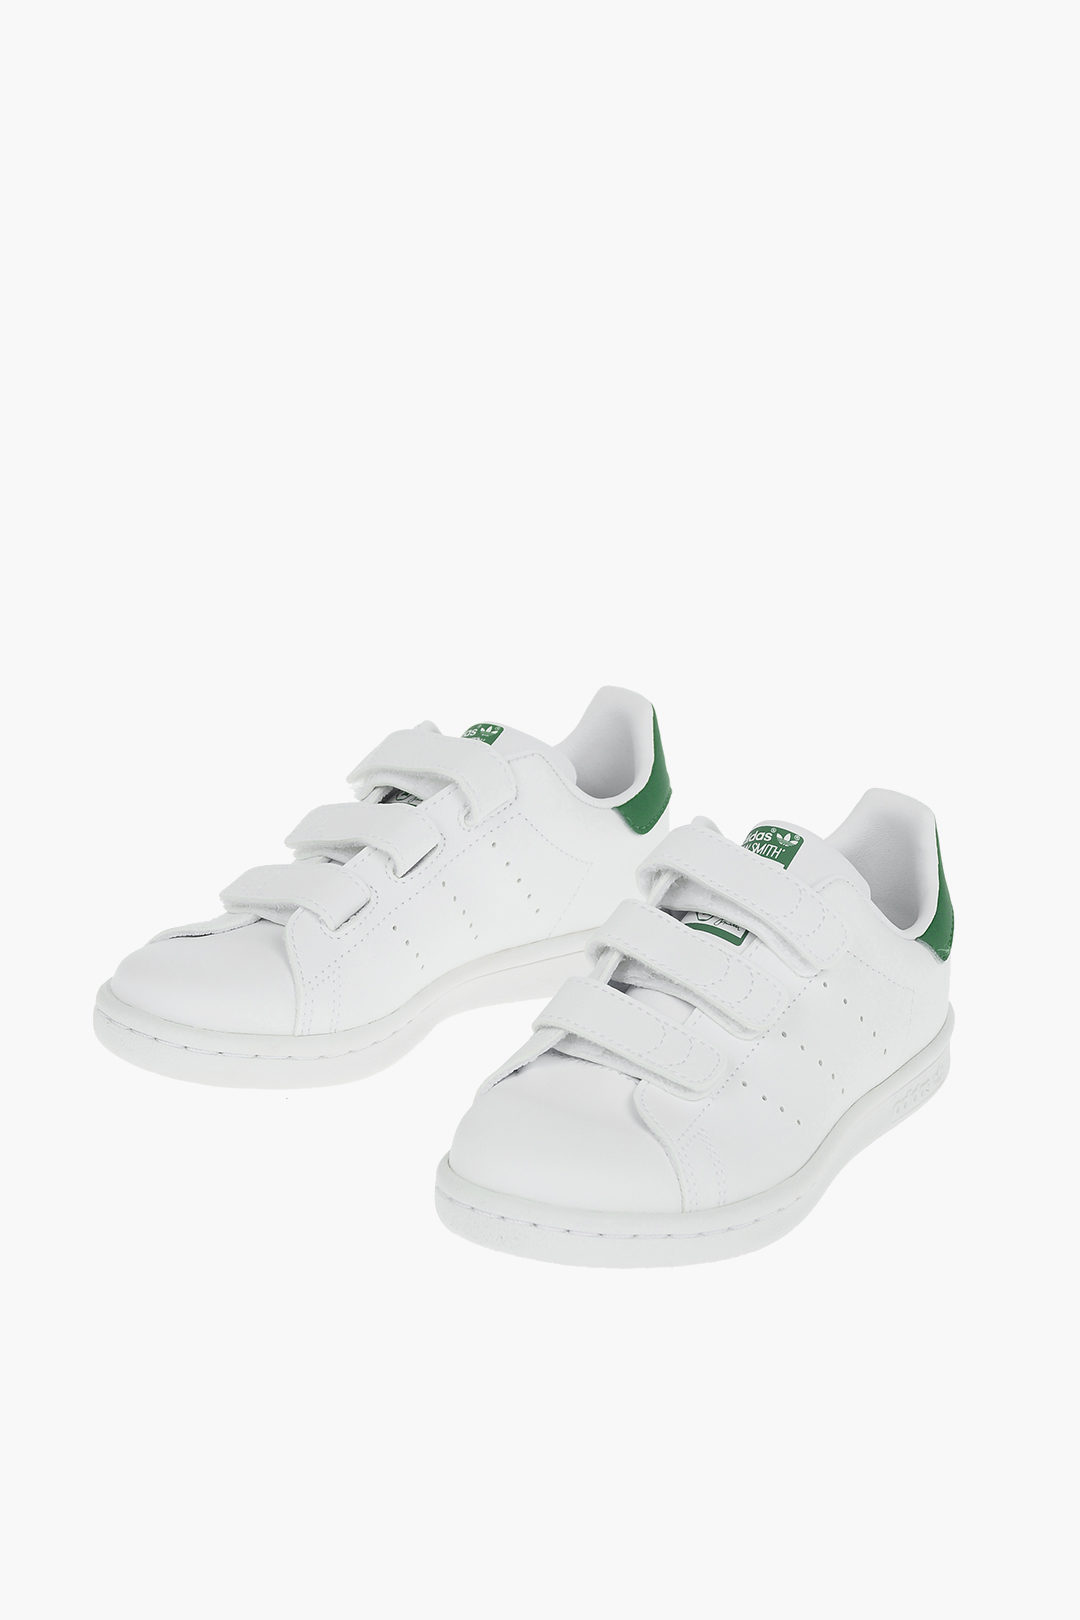 Shop adidas STAN SMITH 2019 SS Flower Patterns Unisex Street Style Leather  Logo Sneakers by LunaFlash